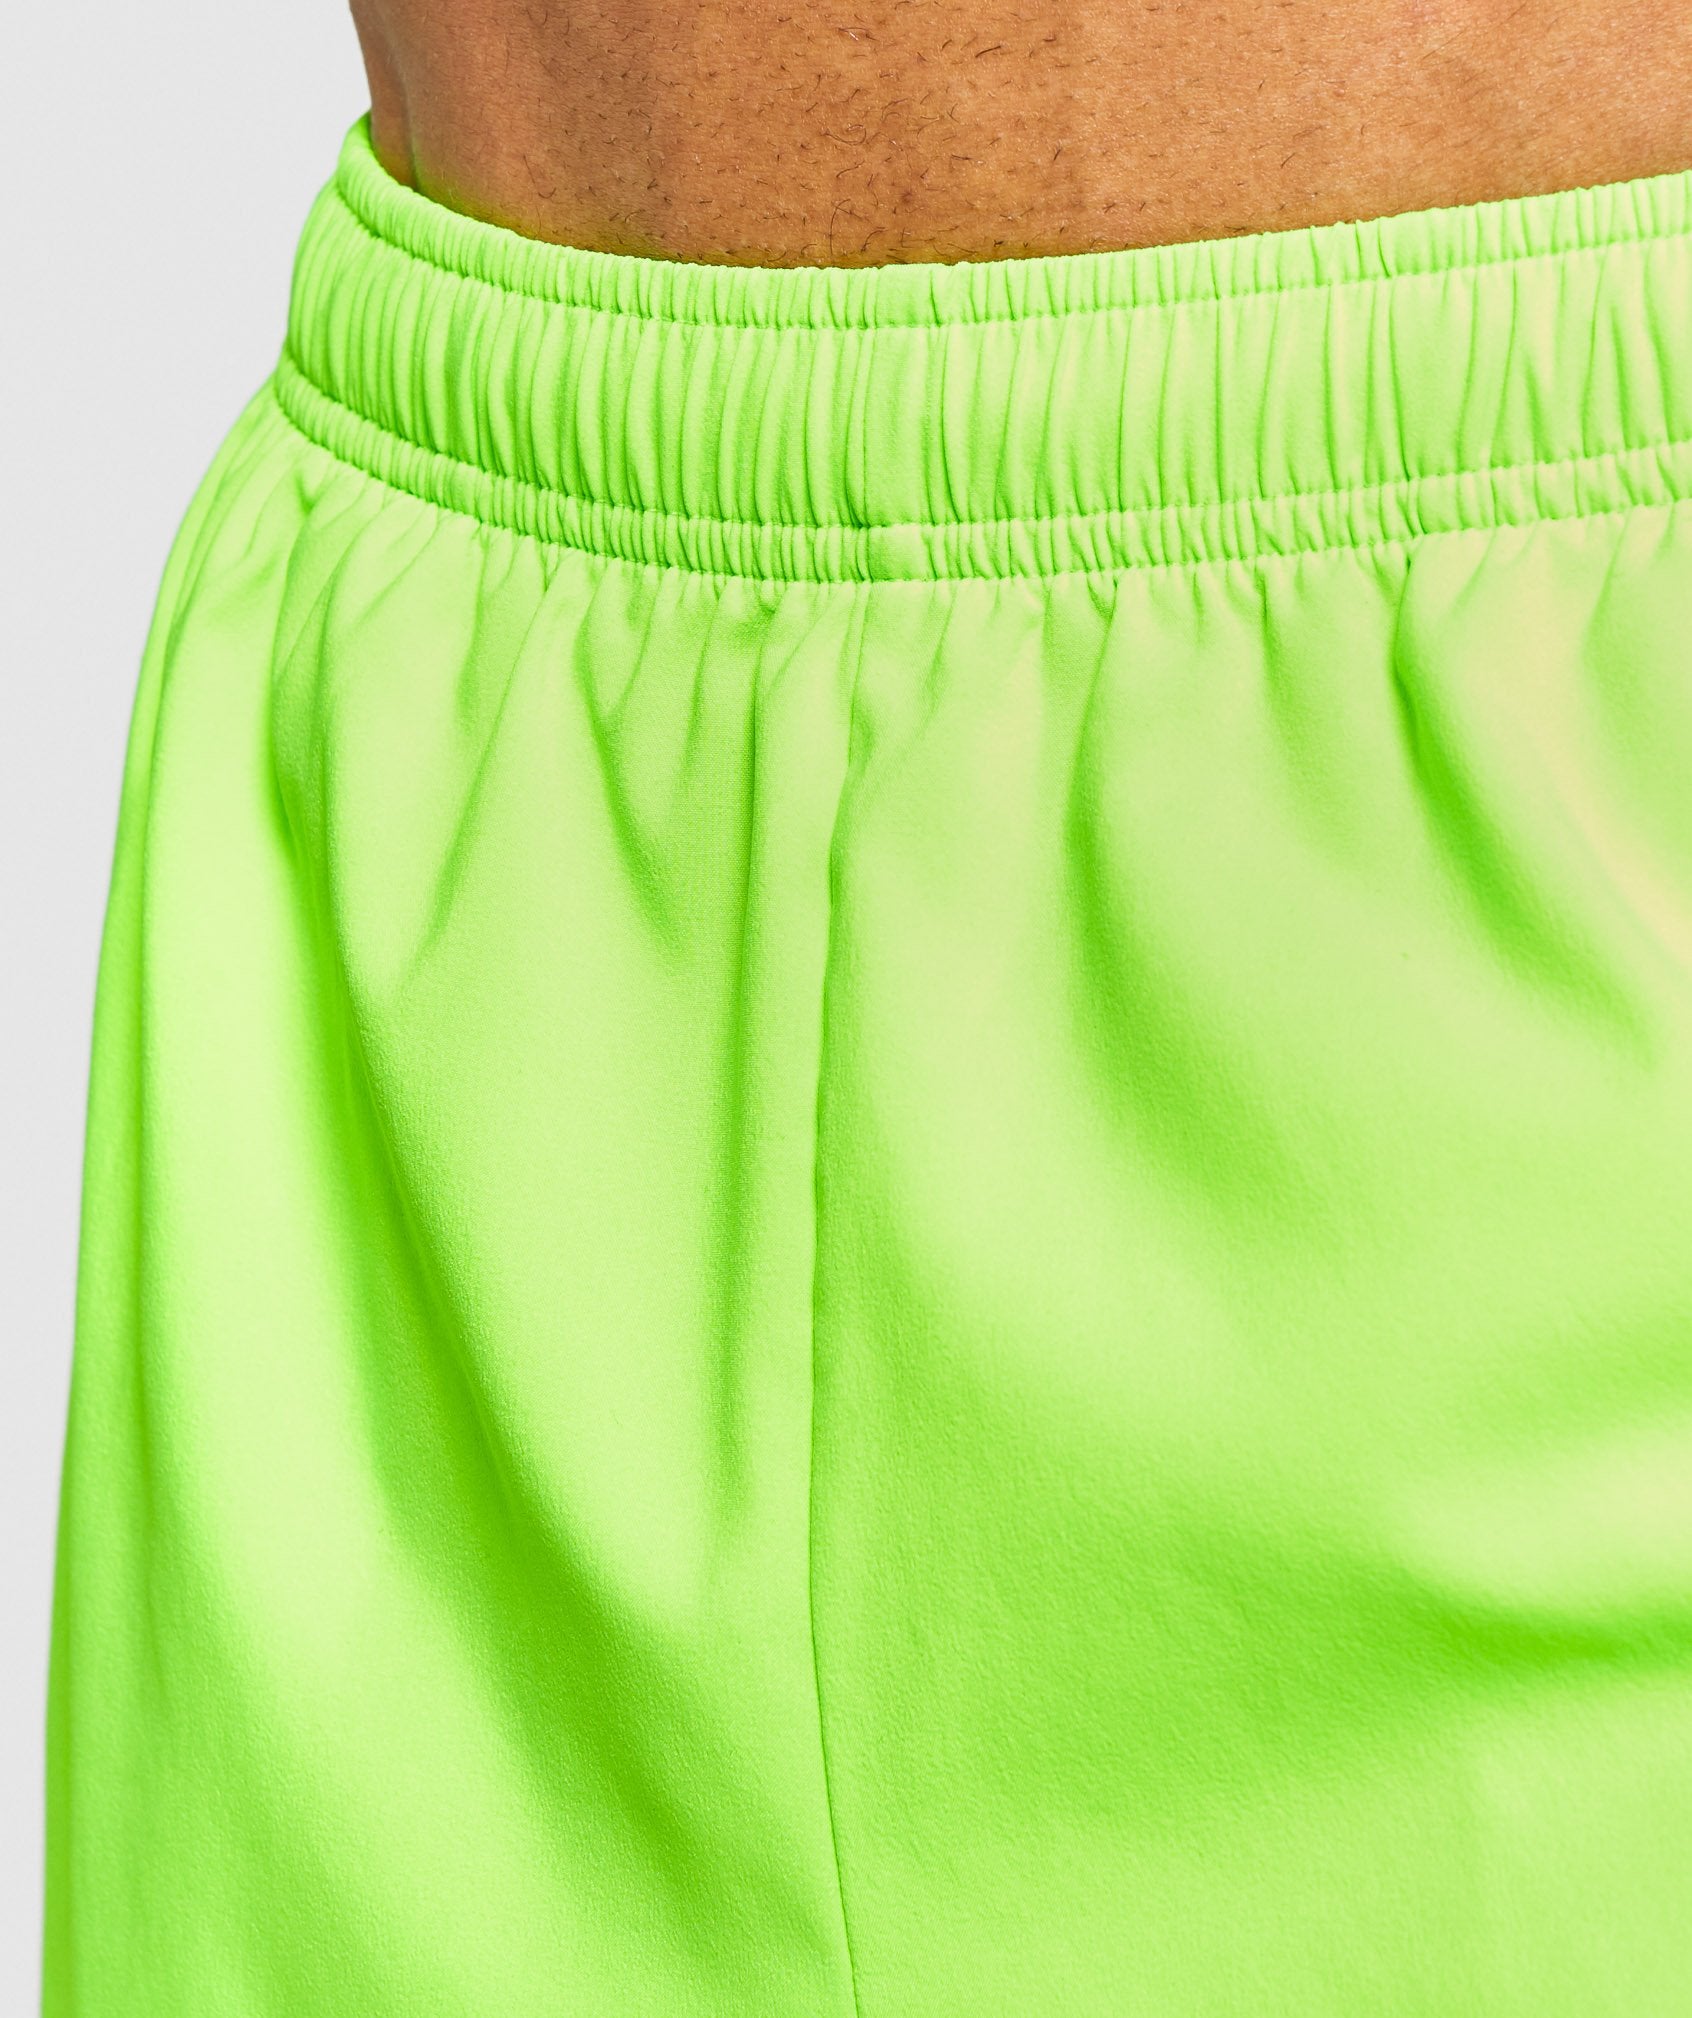 Arrival 5" Zip Pocket Shorts in Lime